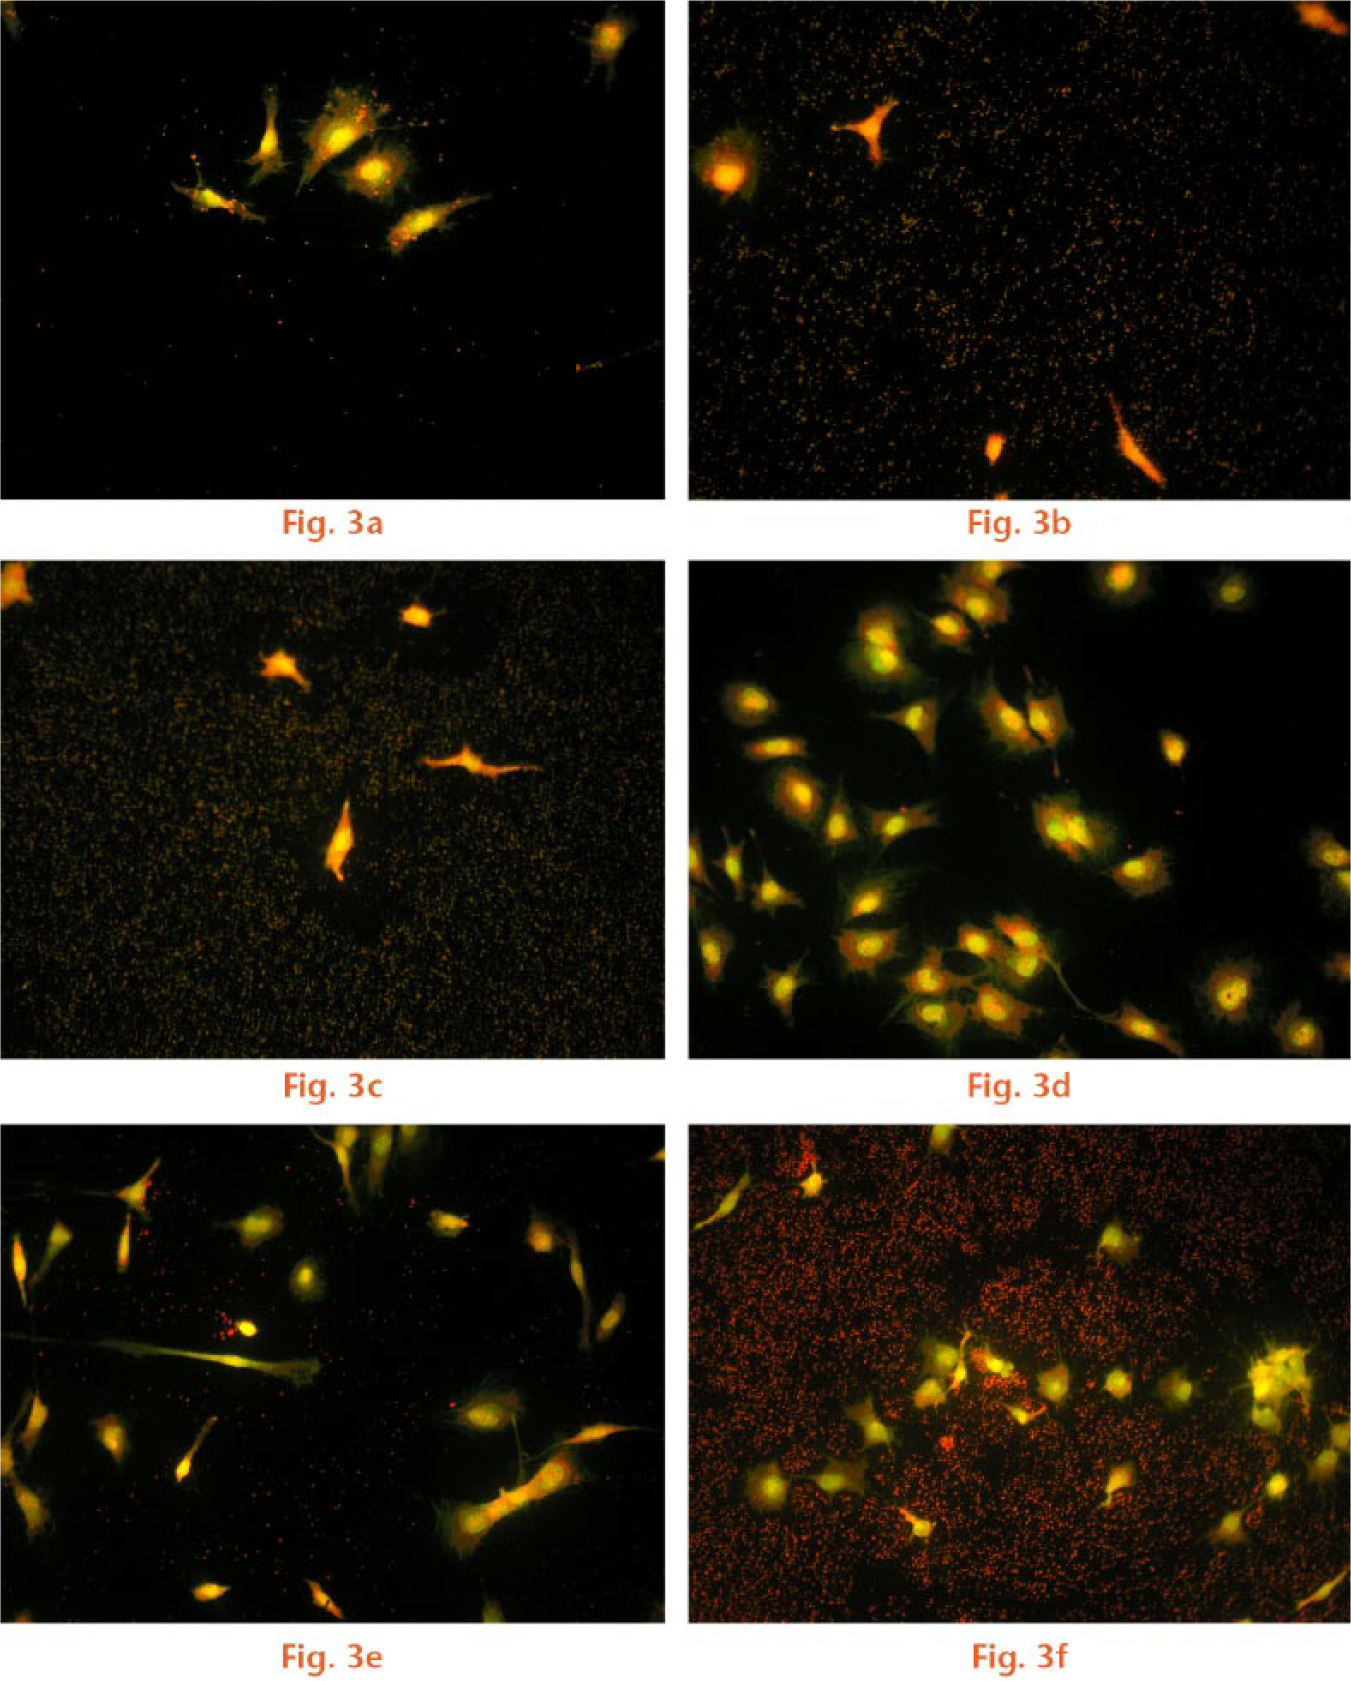  
            Representative fluorescence microscope images of adherence of clinical strains in the presence of pre-osteoblasts. 3A-C: S. aureus strain P2 (concentrations: A-104, B-106, C-108). 3D-F: S. epidermidis strain P55 (concentrations: D-104, E-106, F-108). 200x magnification.
          